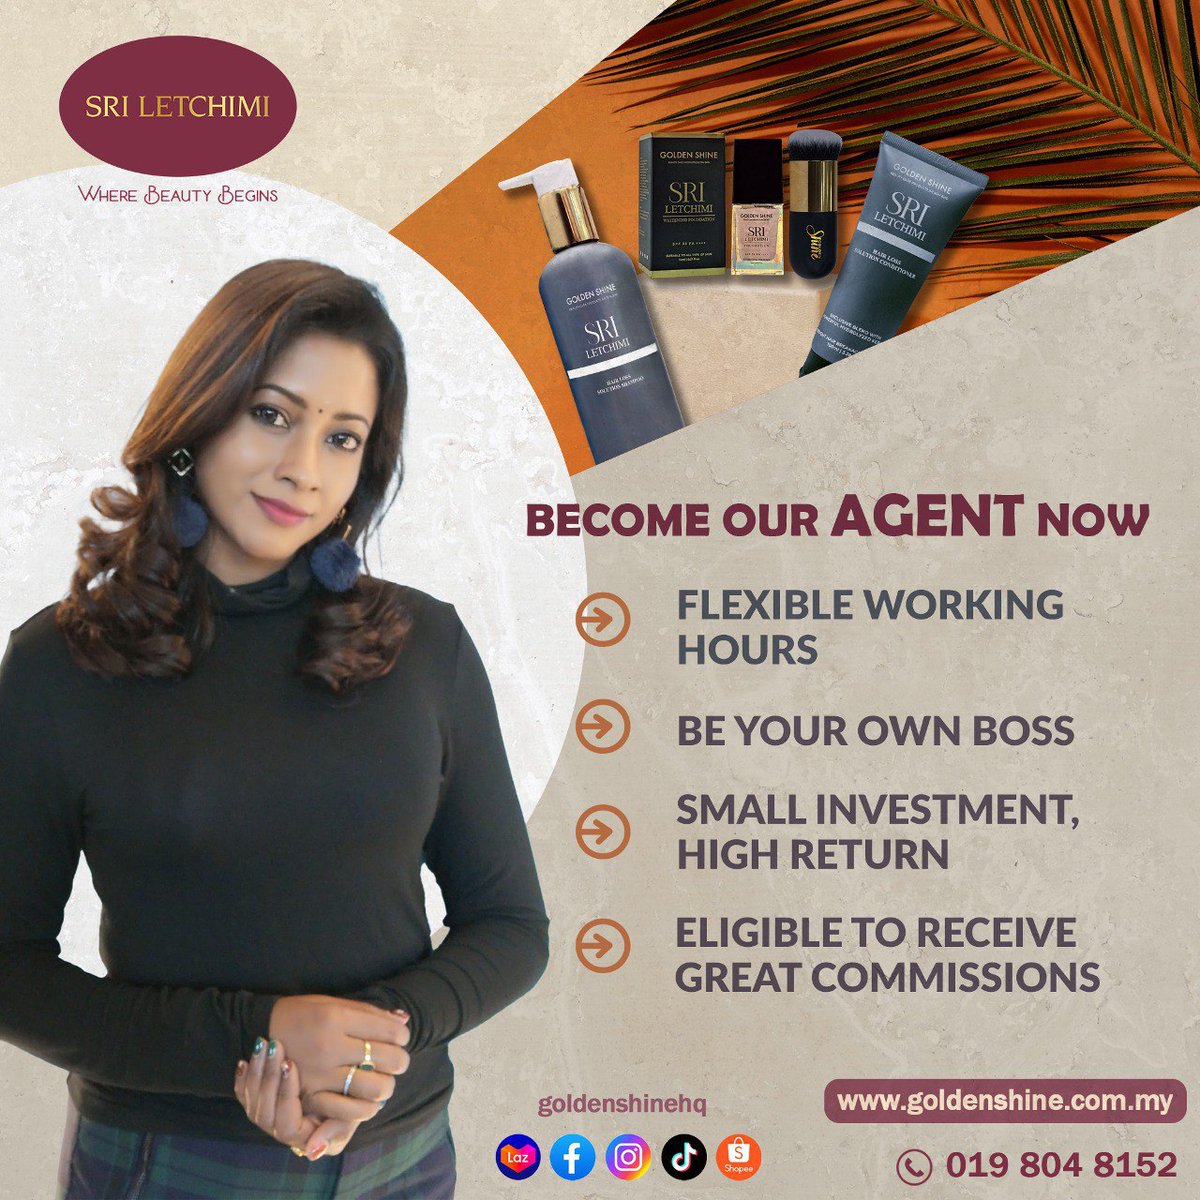 Become our AGENT now . Call for more info
#sriletchimi #agentlife #goldenshine